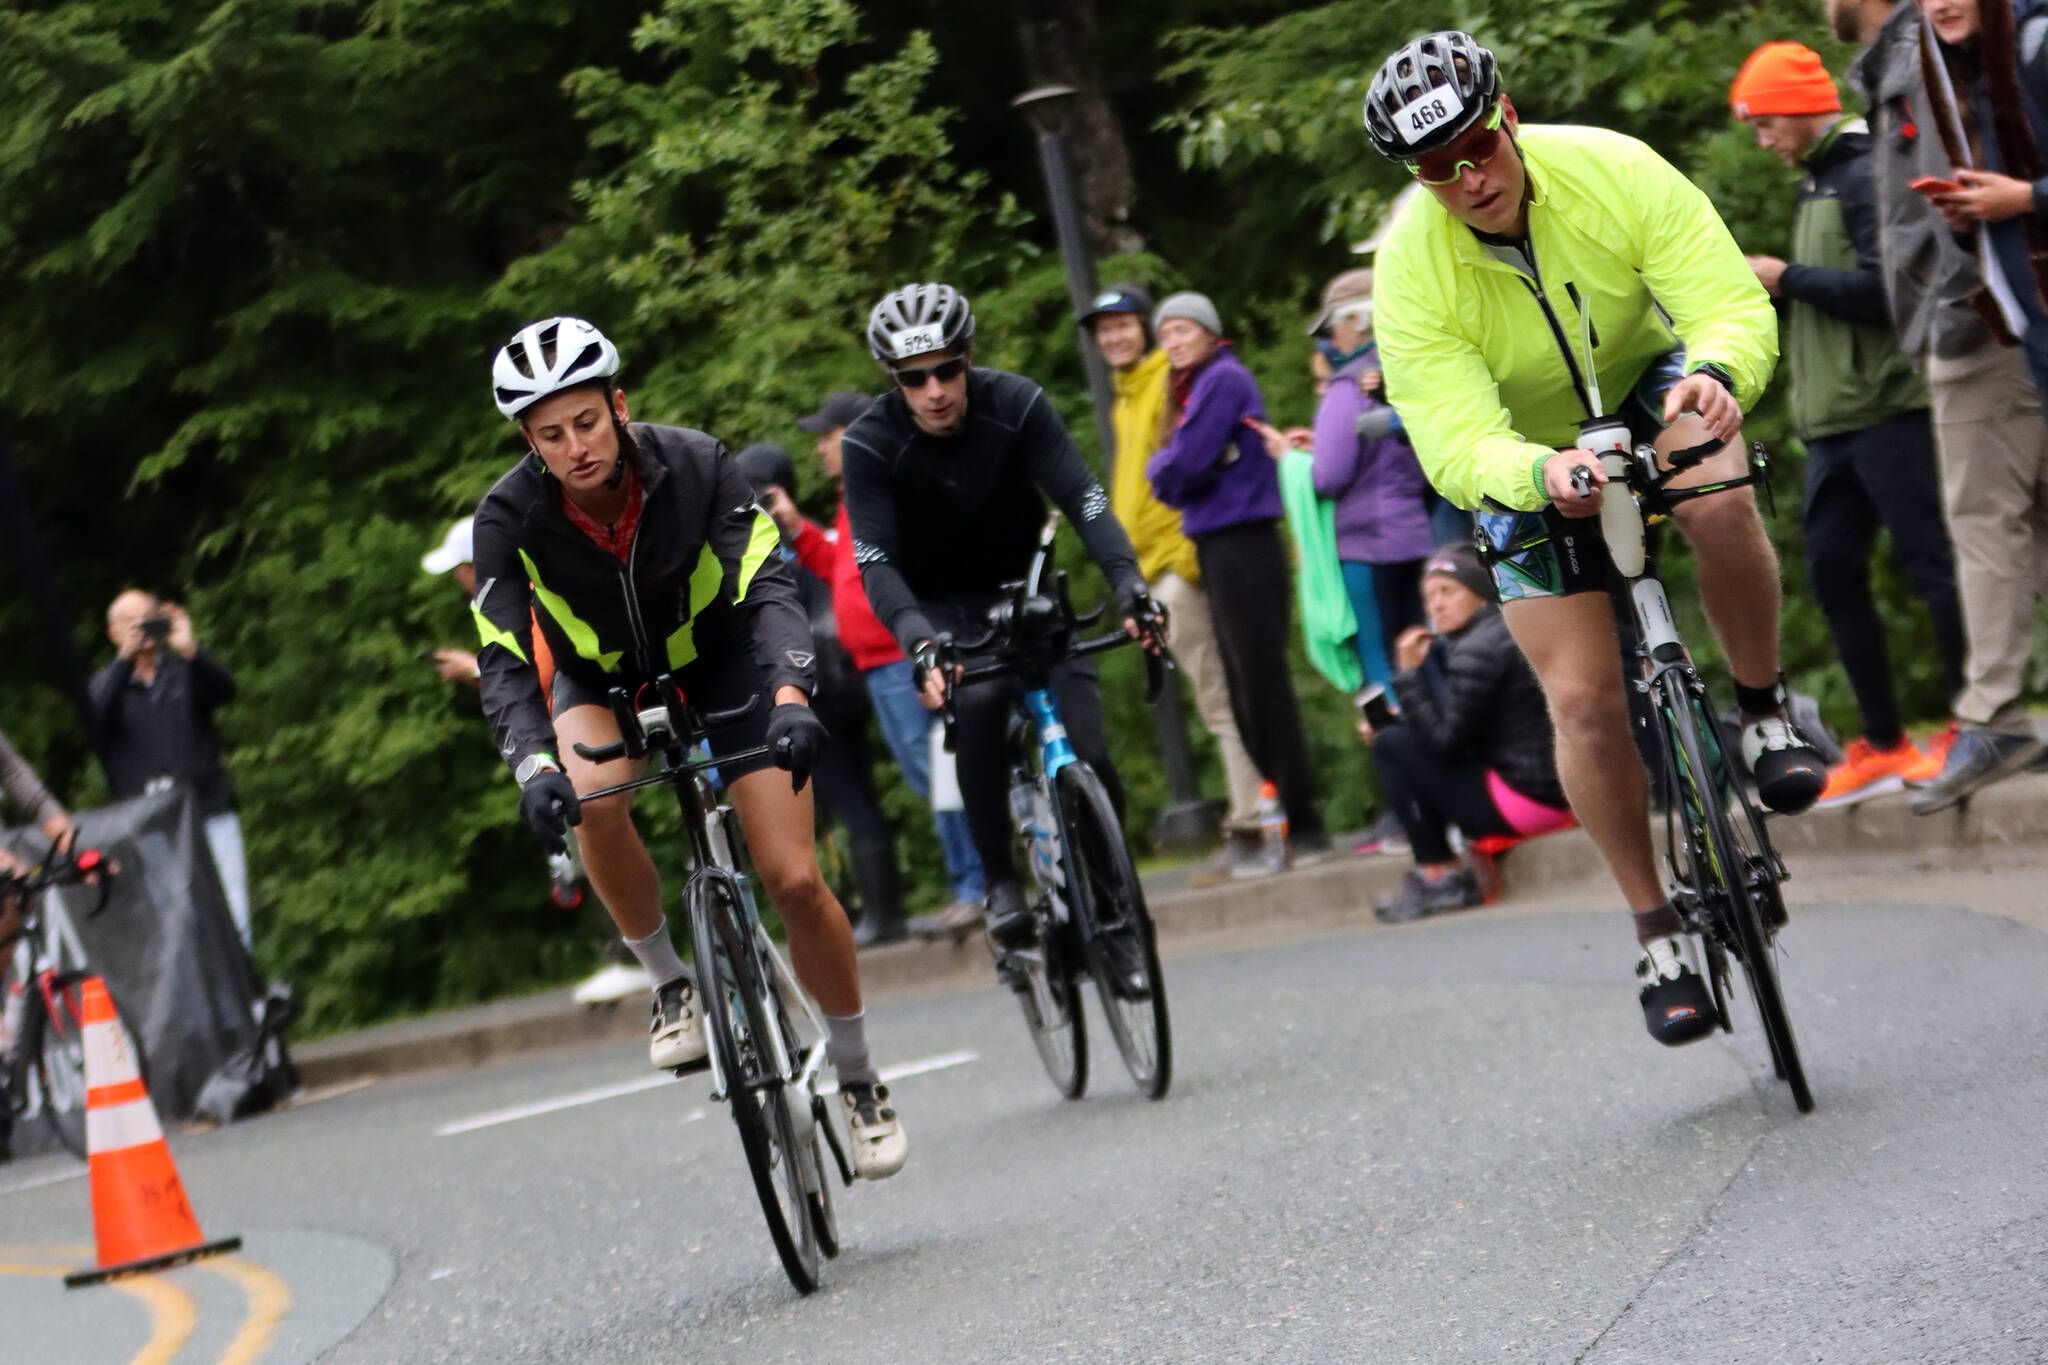 Cyclists pedal away from University of Alaska Southeast Sunday during Ironman Alaska, the first Ironman to be held in the state. The cycling portion of the event requires athletes to cover 112 miles. (Ben Hohenstatt / Juneau Empire)